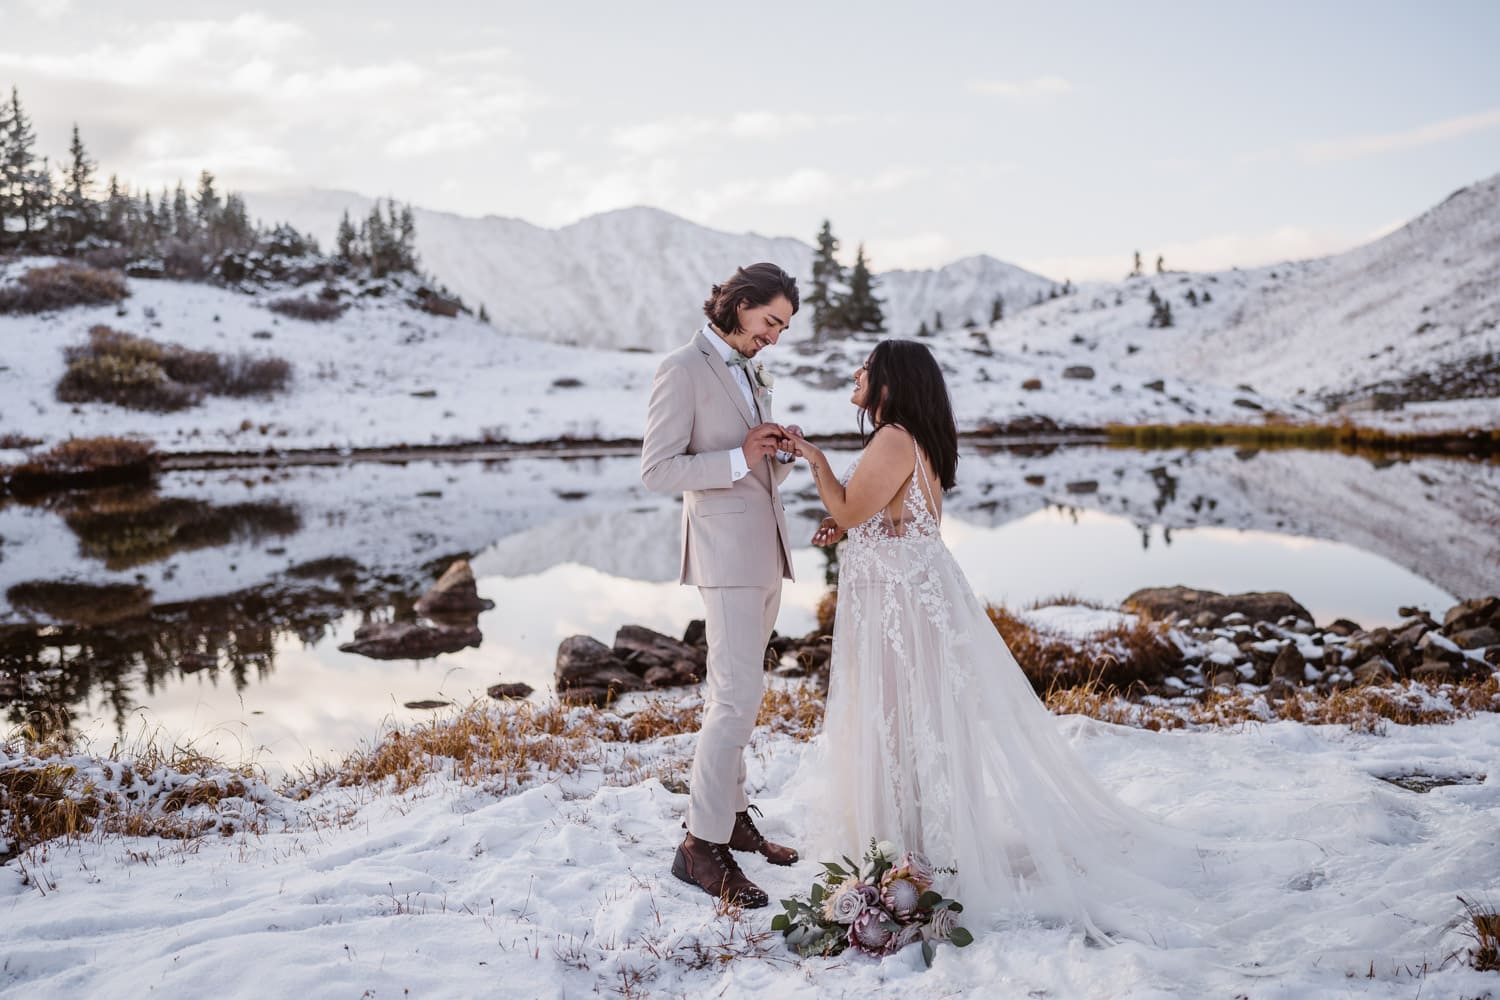 A groom putting the ring on his bride in the snow during their Self-Solemnization elopement in Colorado.